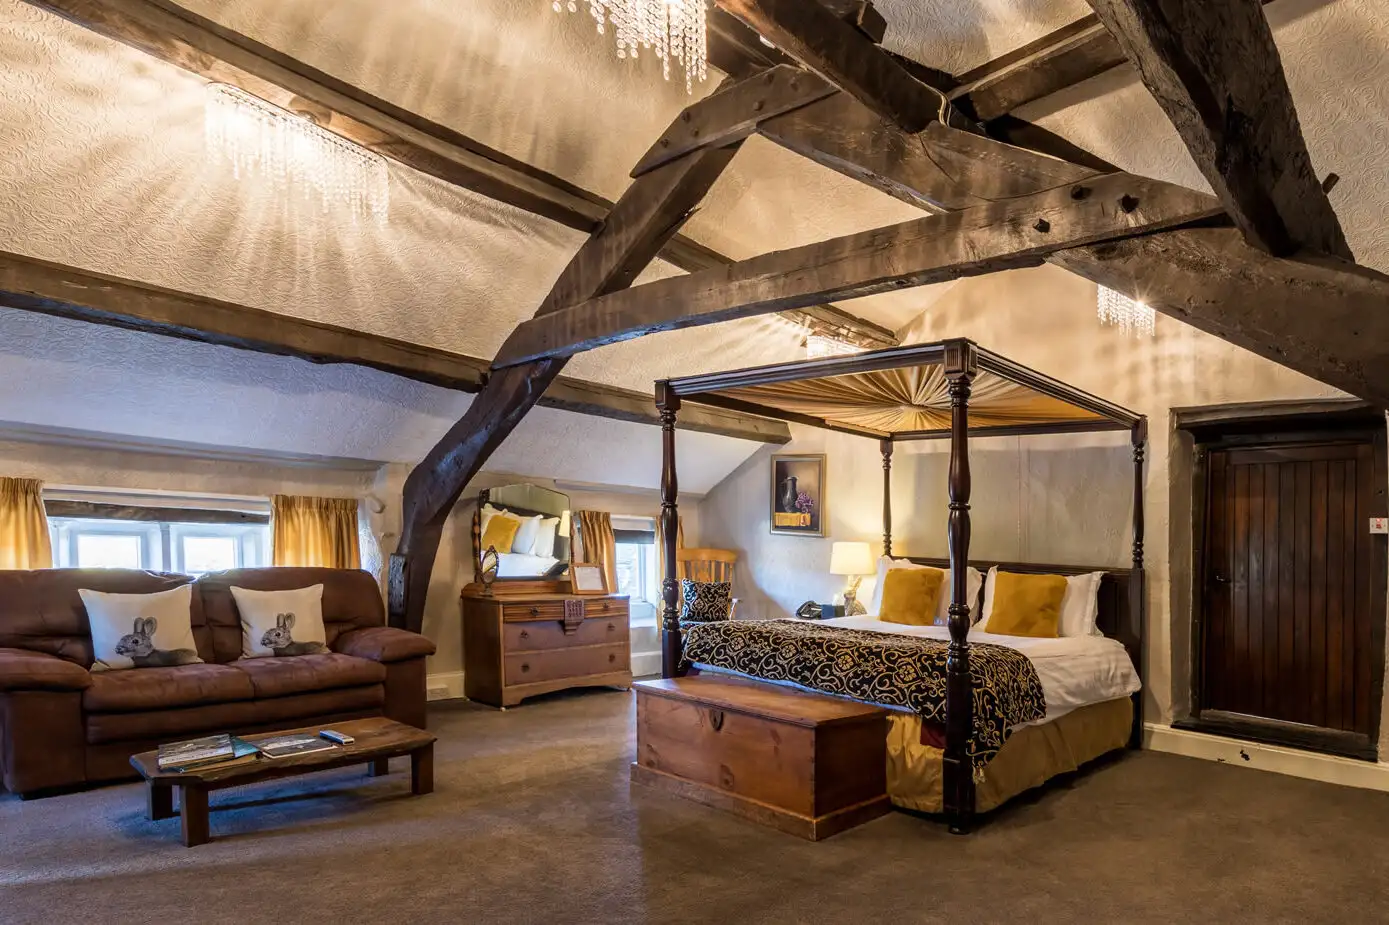 The Copley Suite at Gosforth Hall Inn, a rustic looking room with wooden beams, a large bed, and a couch